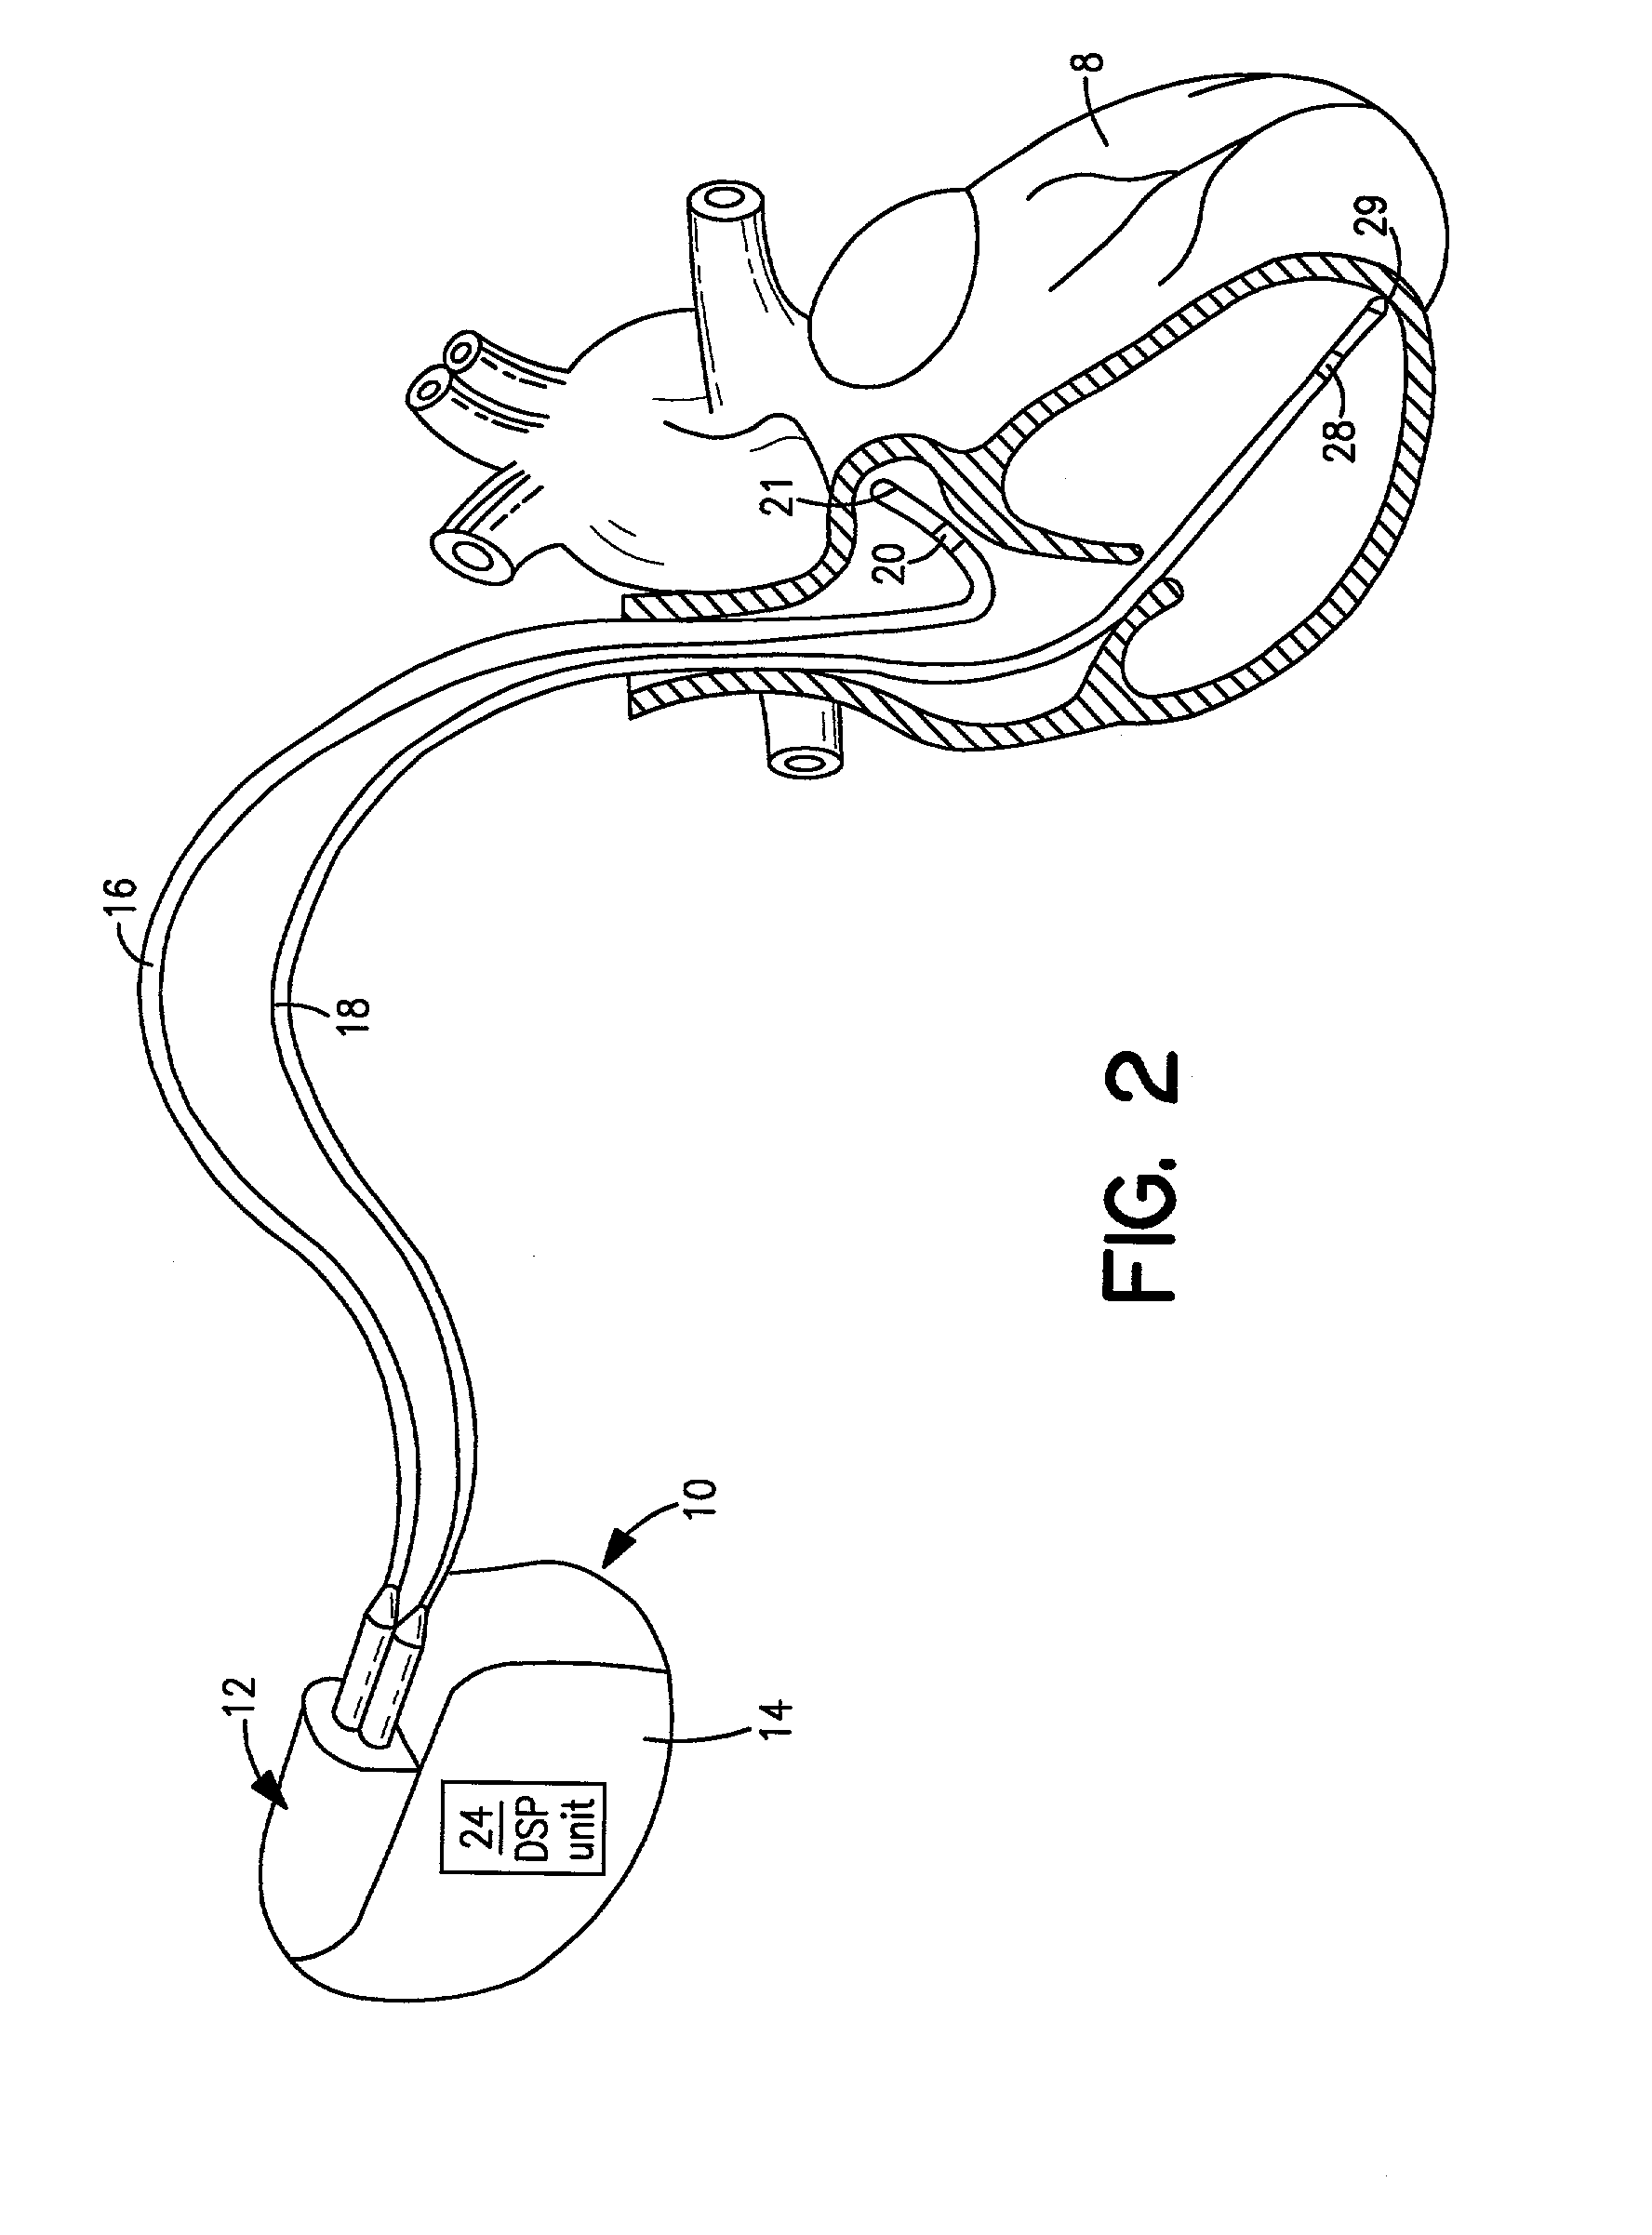 Method and system for transferring and storing data in a medical device with limited storage and memory